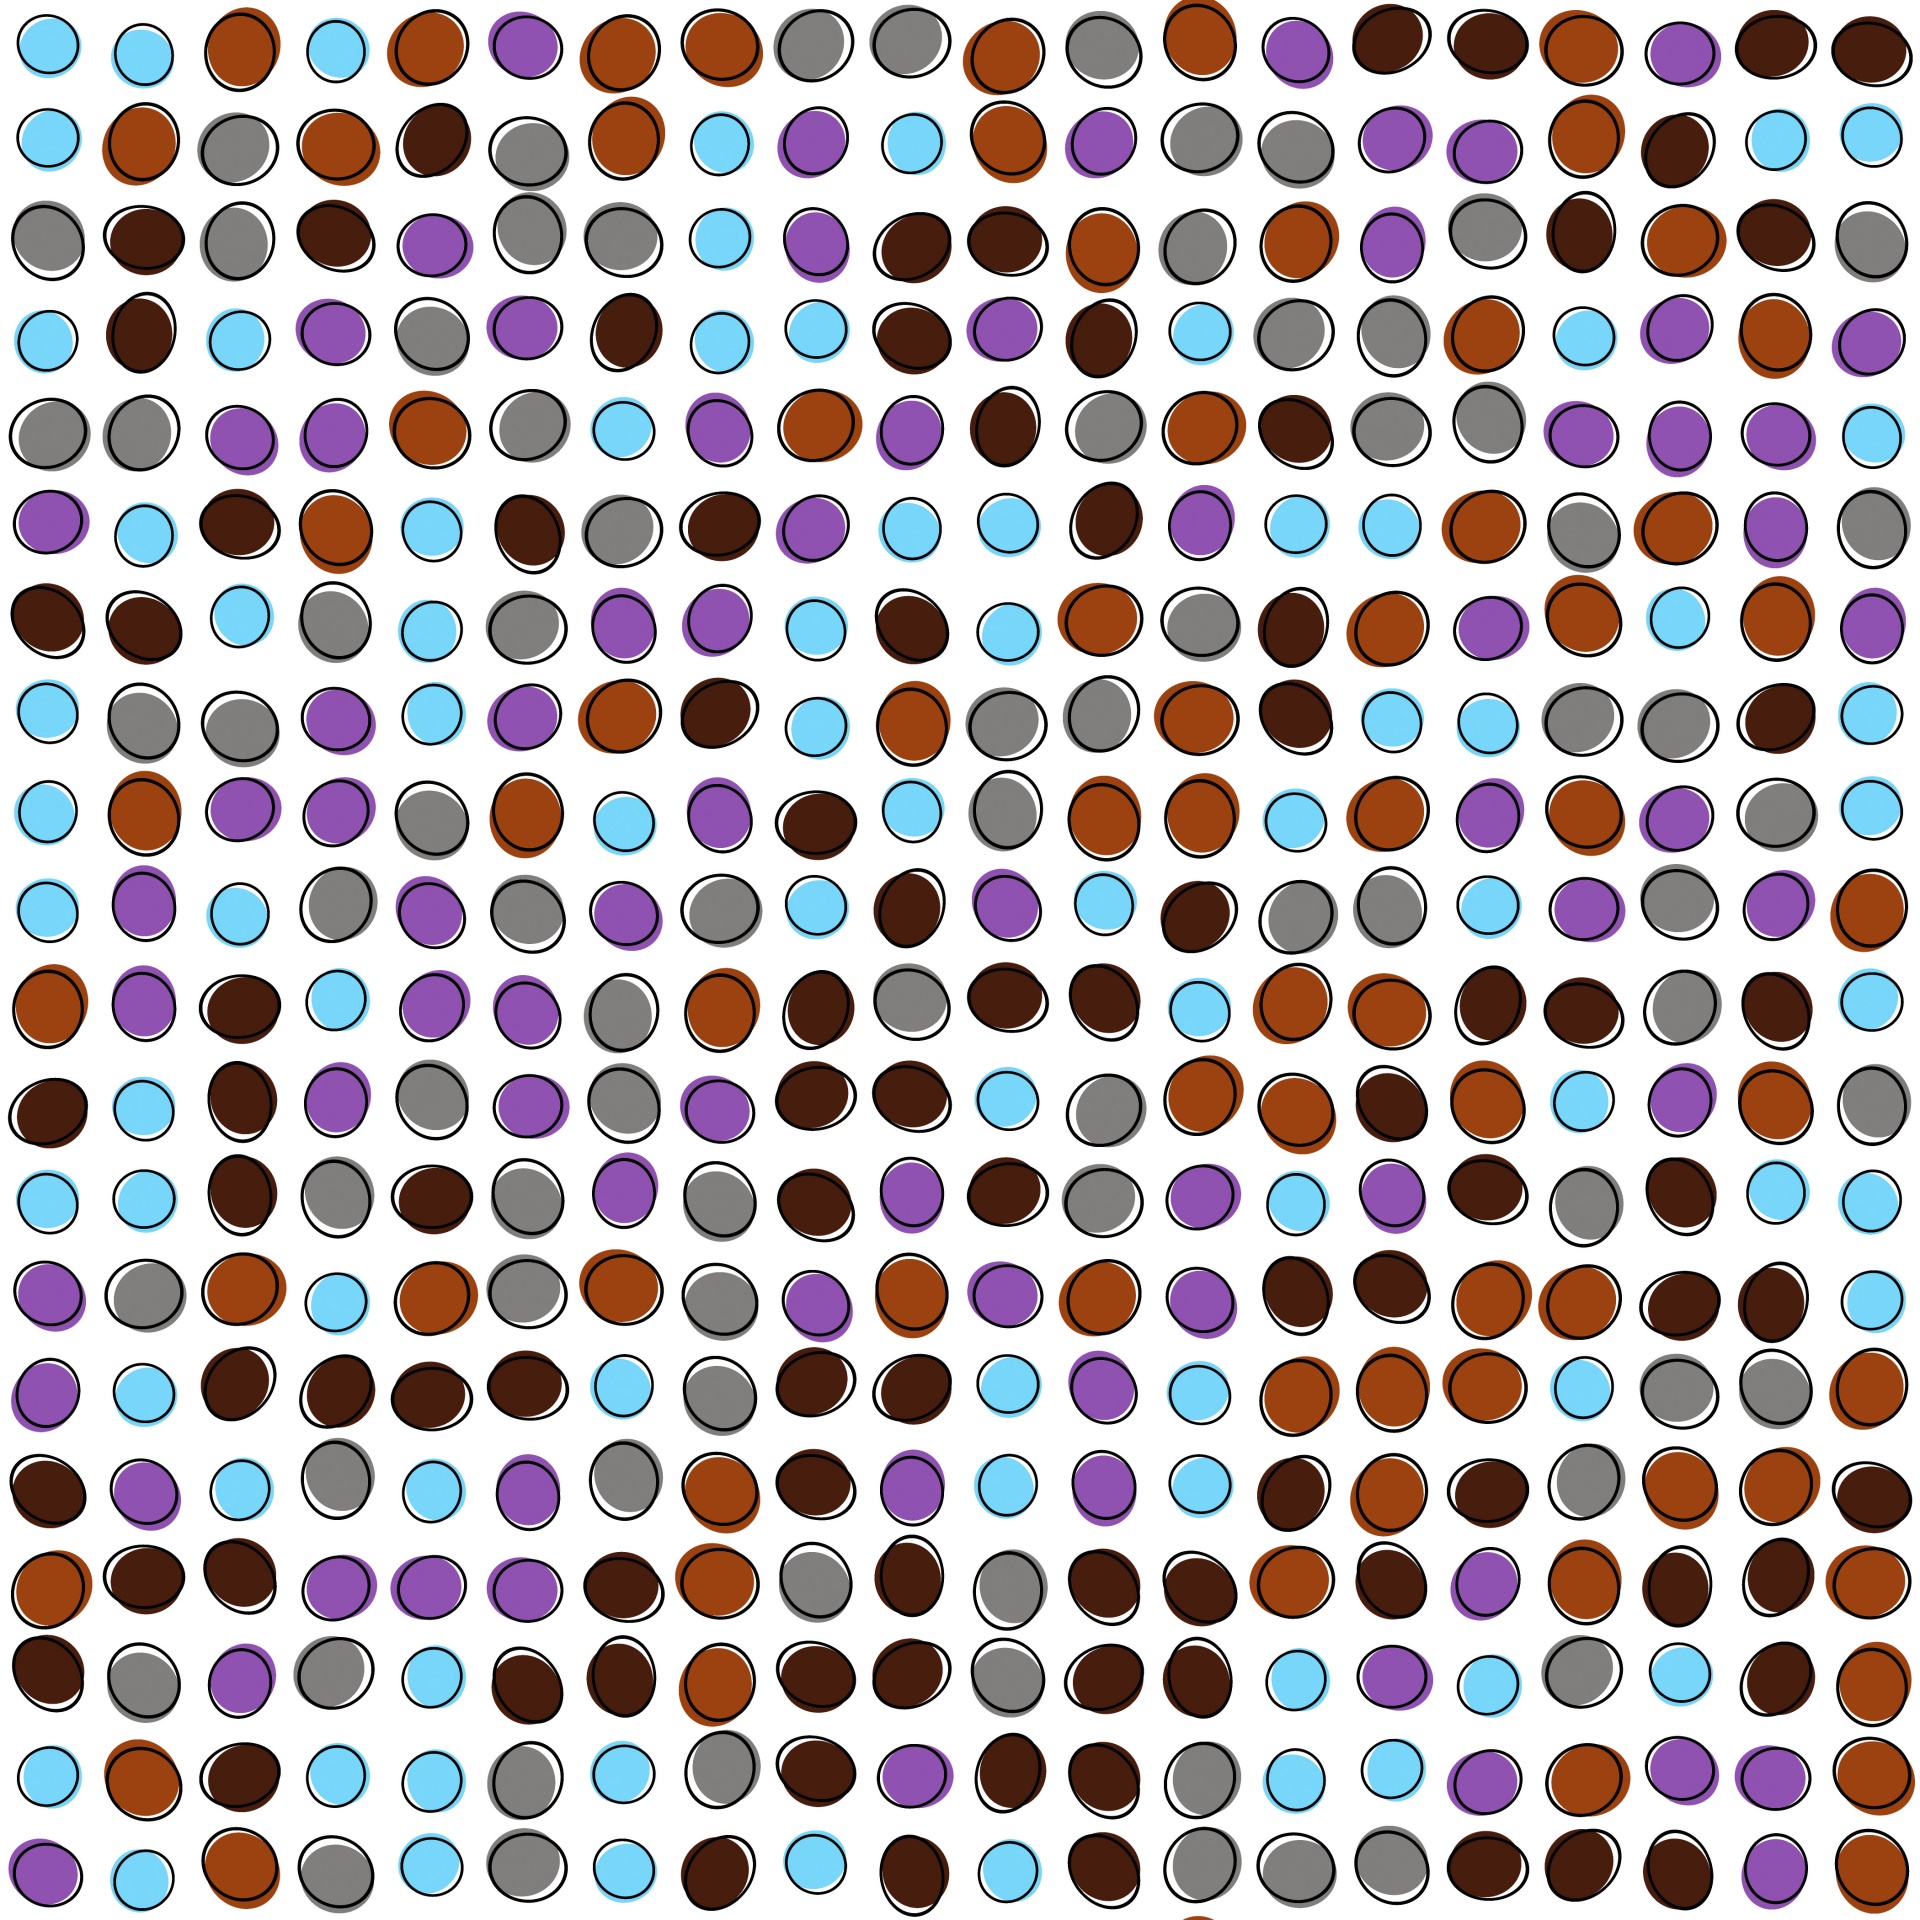 small brown, orange, purple, blue assorted oval retro dot illustrations on white background, patterned paper for cards, graphics, web posts, scrapbook,seamless